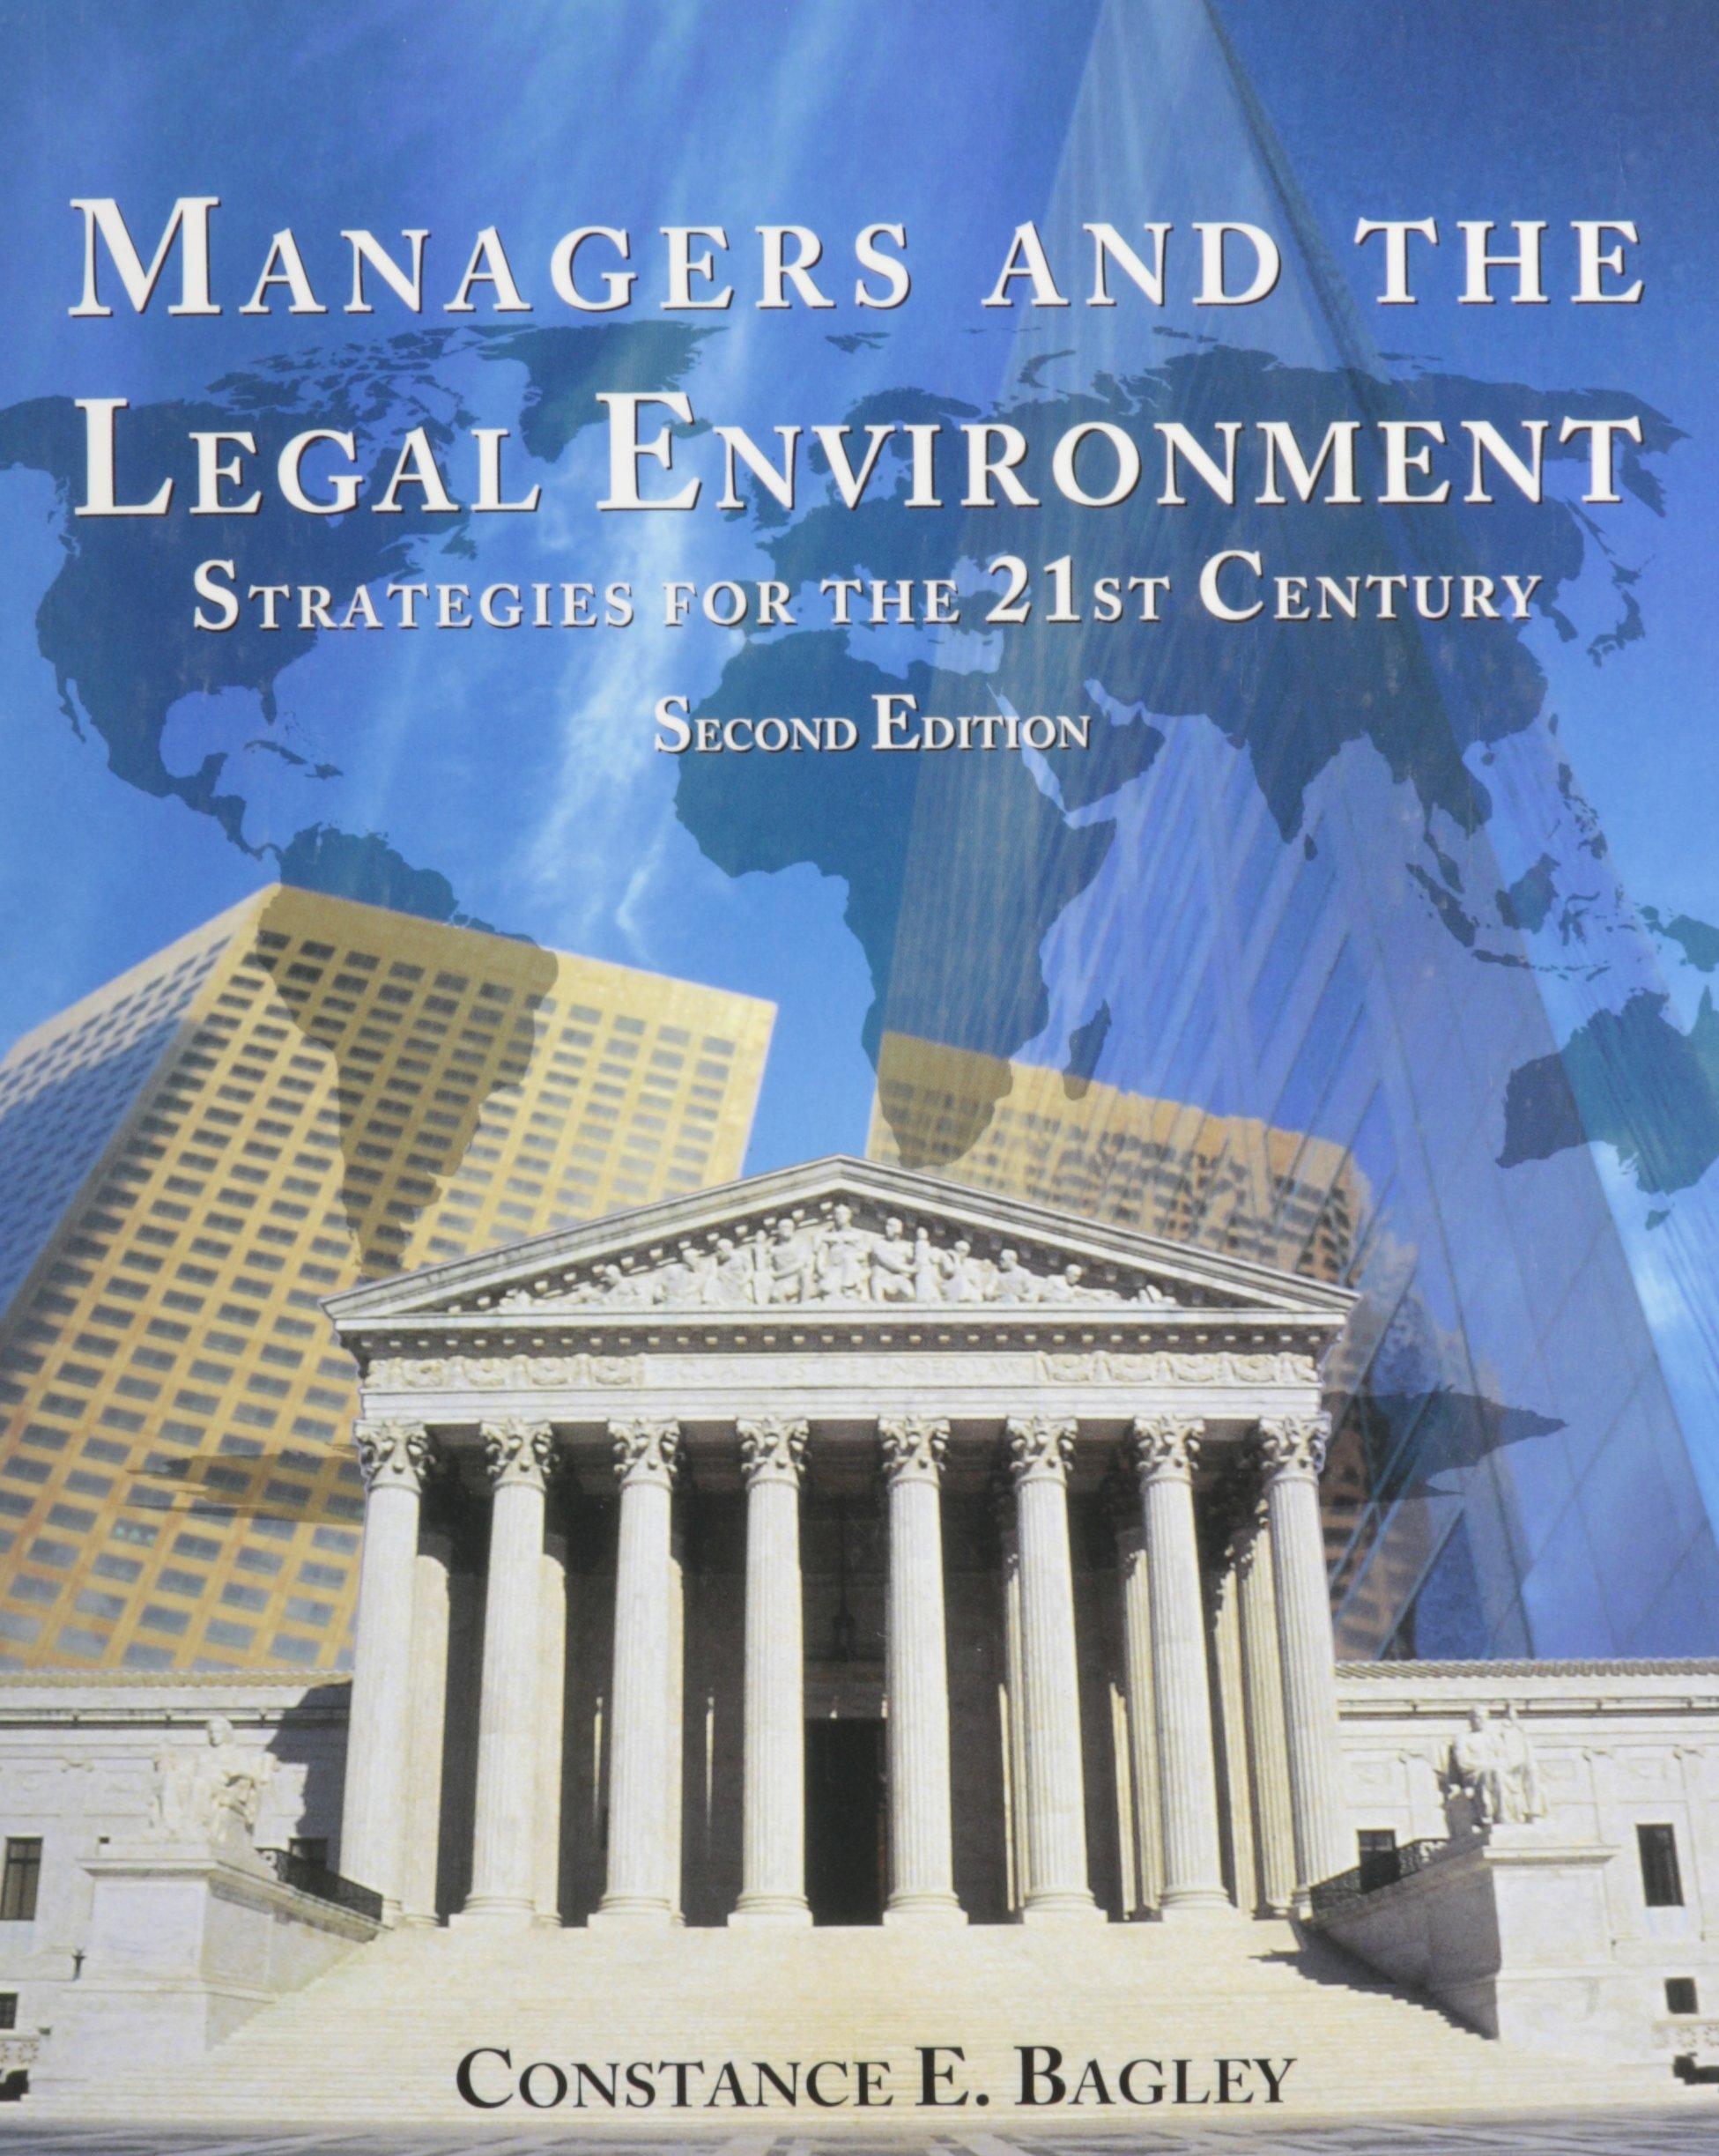 managers and the legal environment strategies for the 21st century 2nd edition constance e. bagley